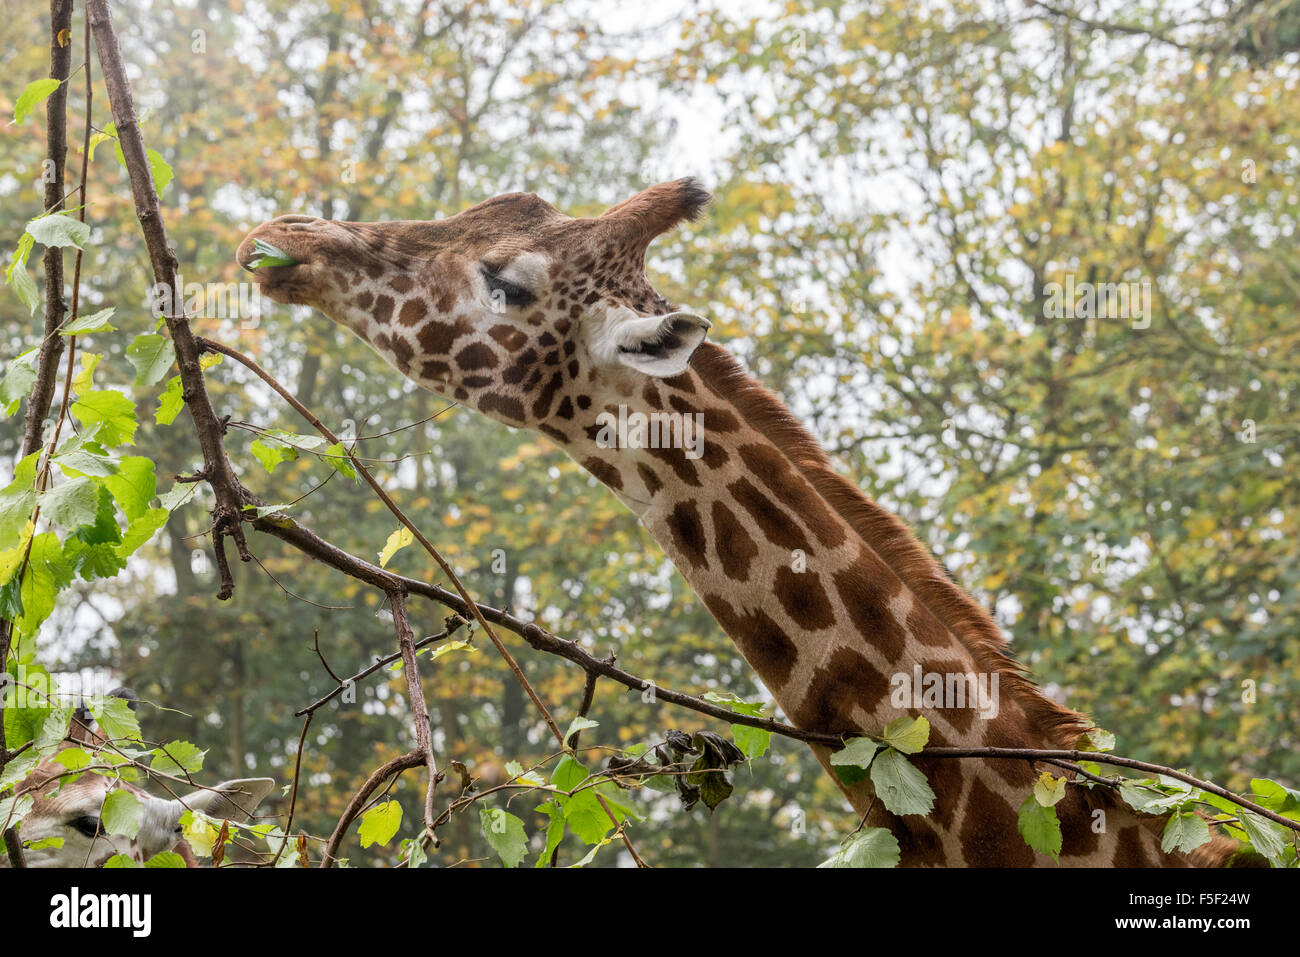 A Giraffe eating leaves at Dudley Zoo West Midlands UK Stock Photo